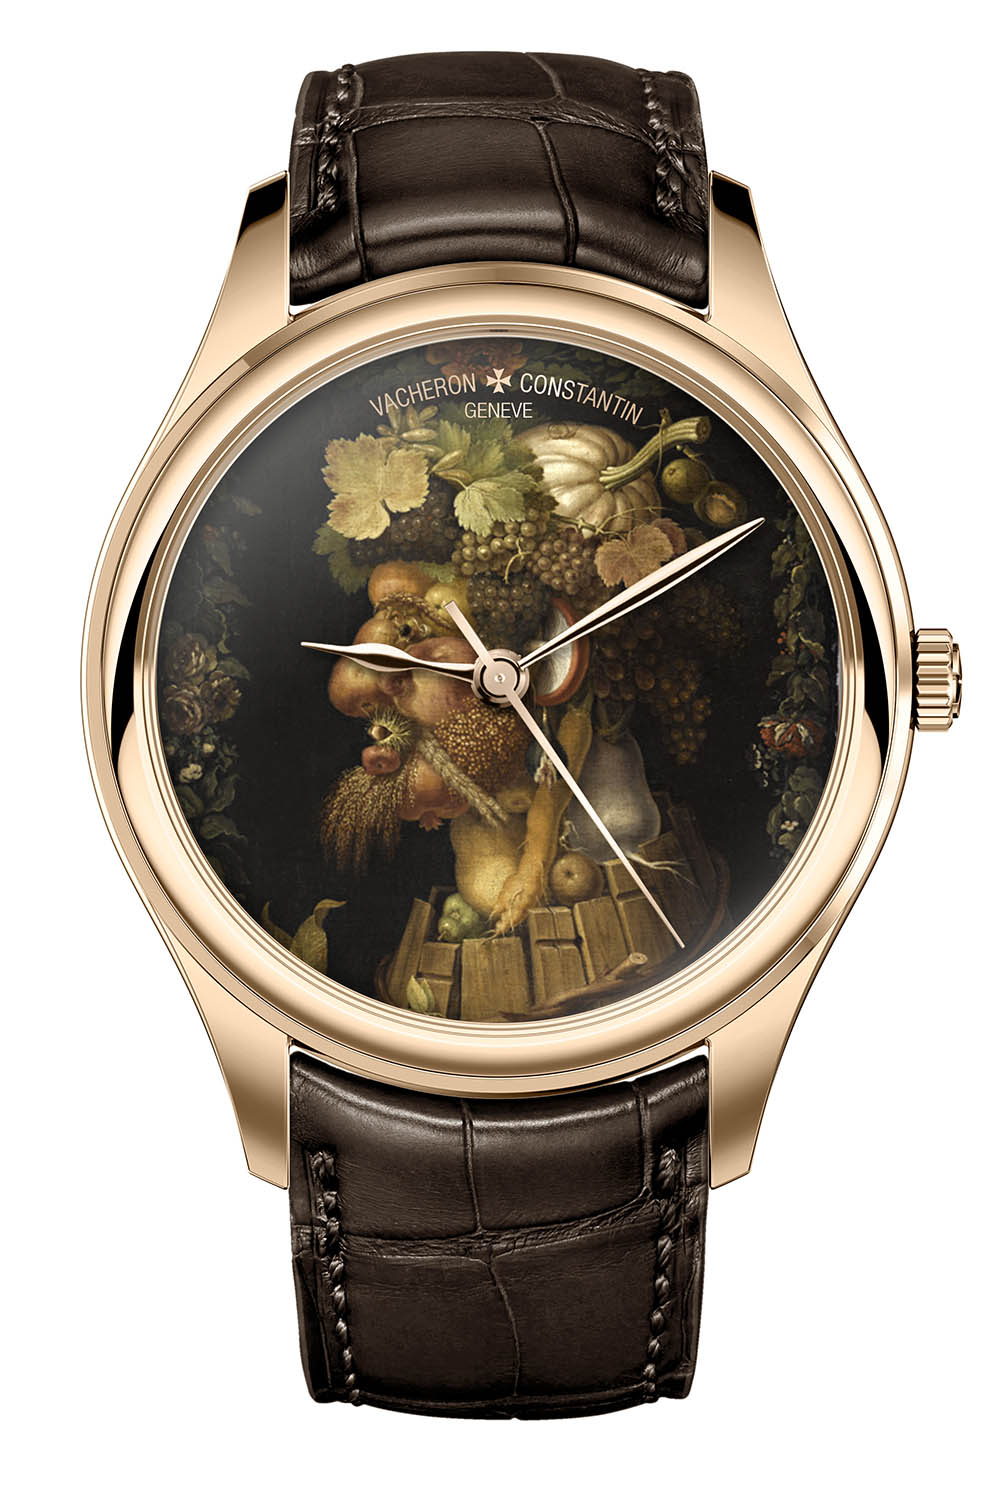 Bespoke Vacheron Constantin up for auction at the Louvre Museum - 3